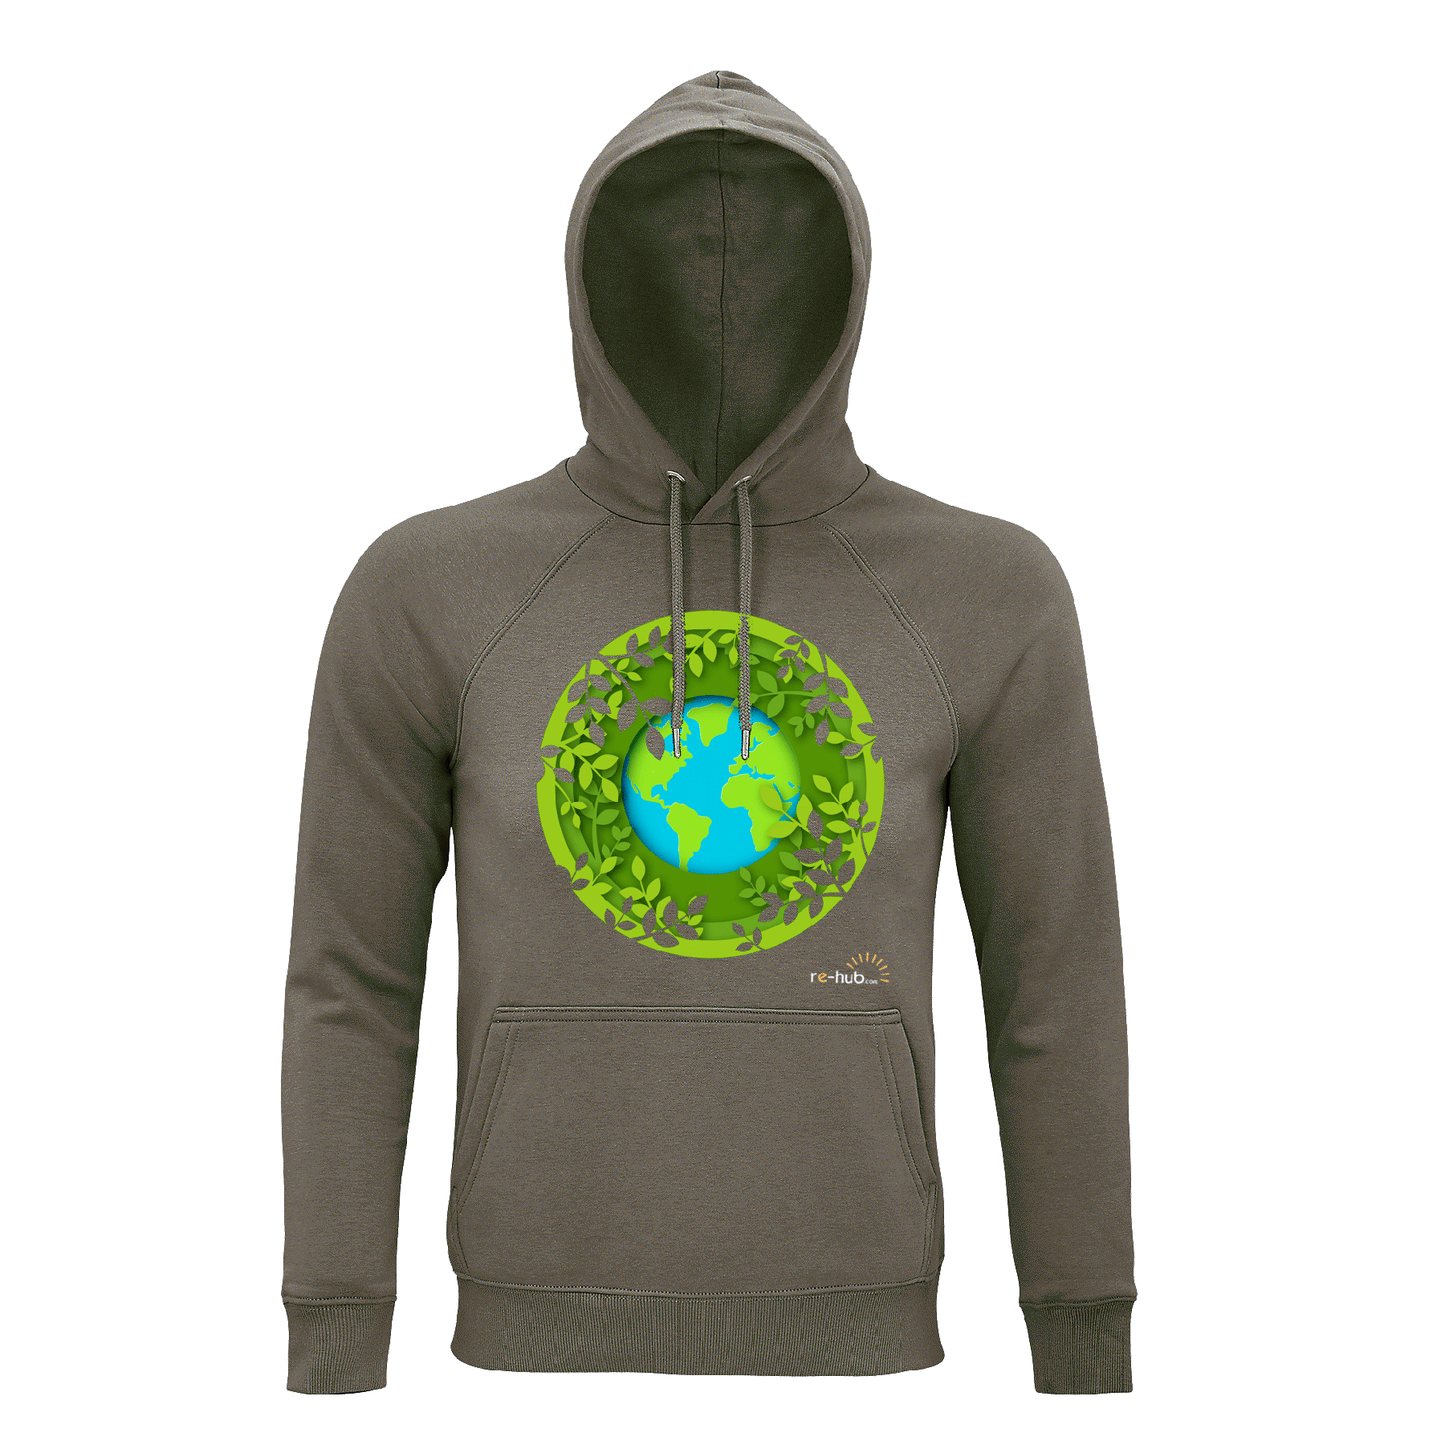 WOMAN'S GREEN PLANET HOODIE 80% organic cotton - 20% recycled polyester